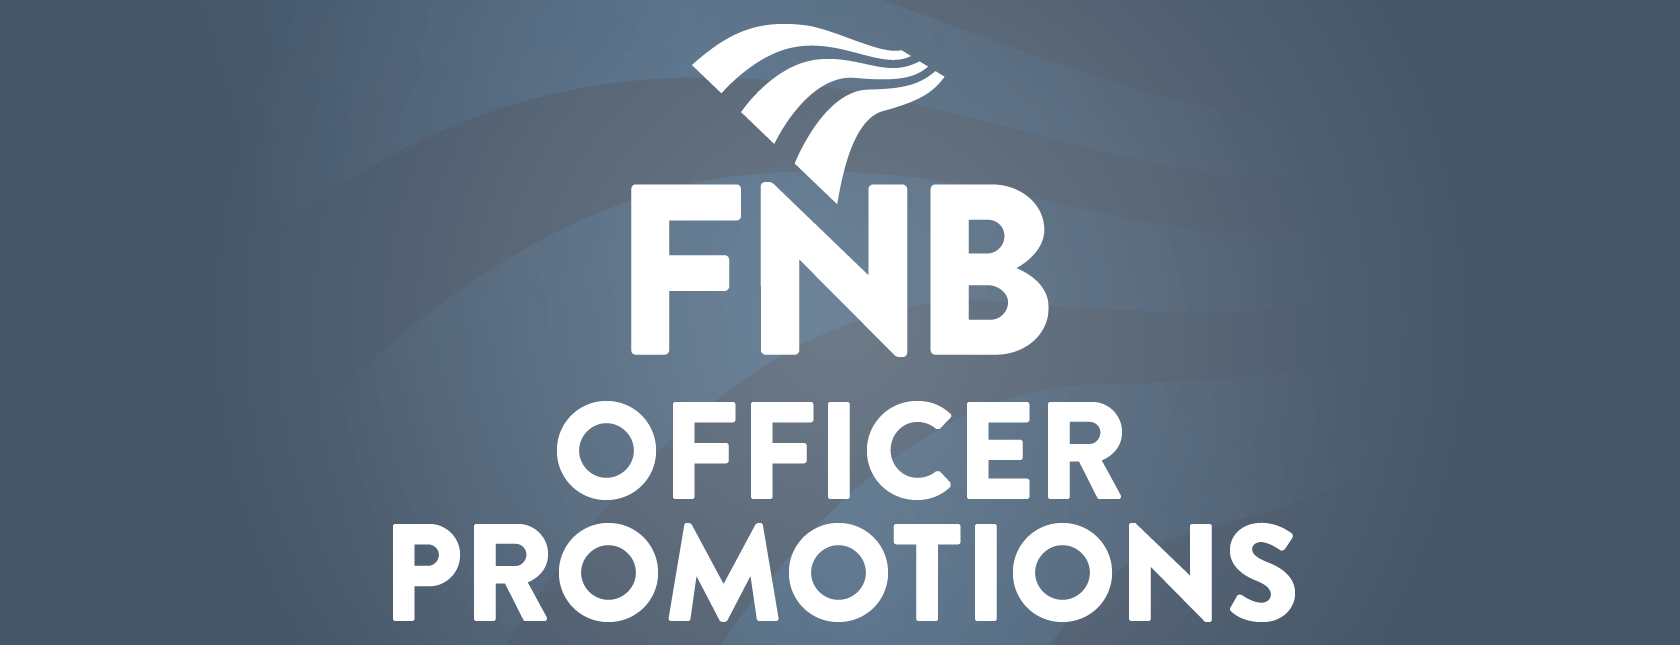 FNB's Recent Officer Promotions